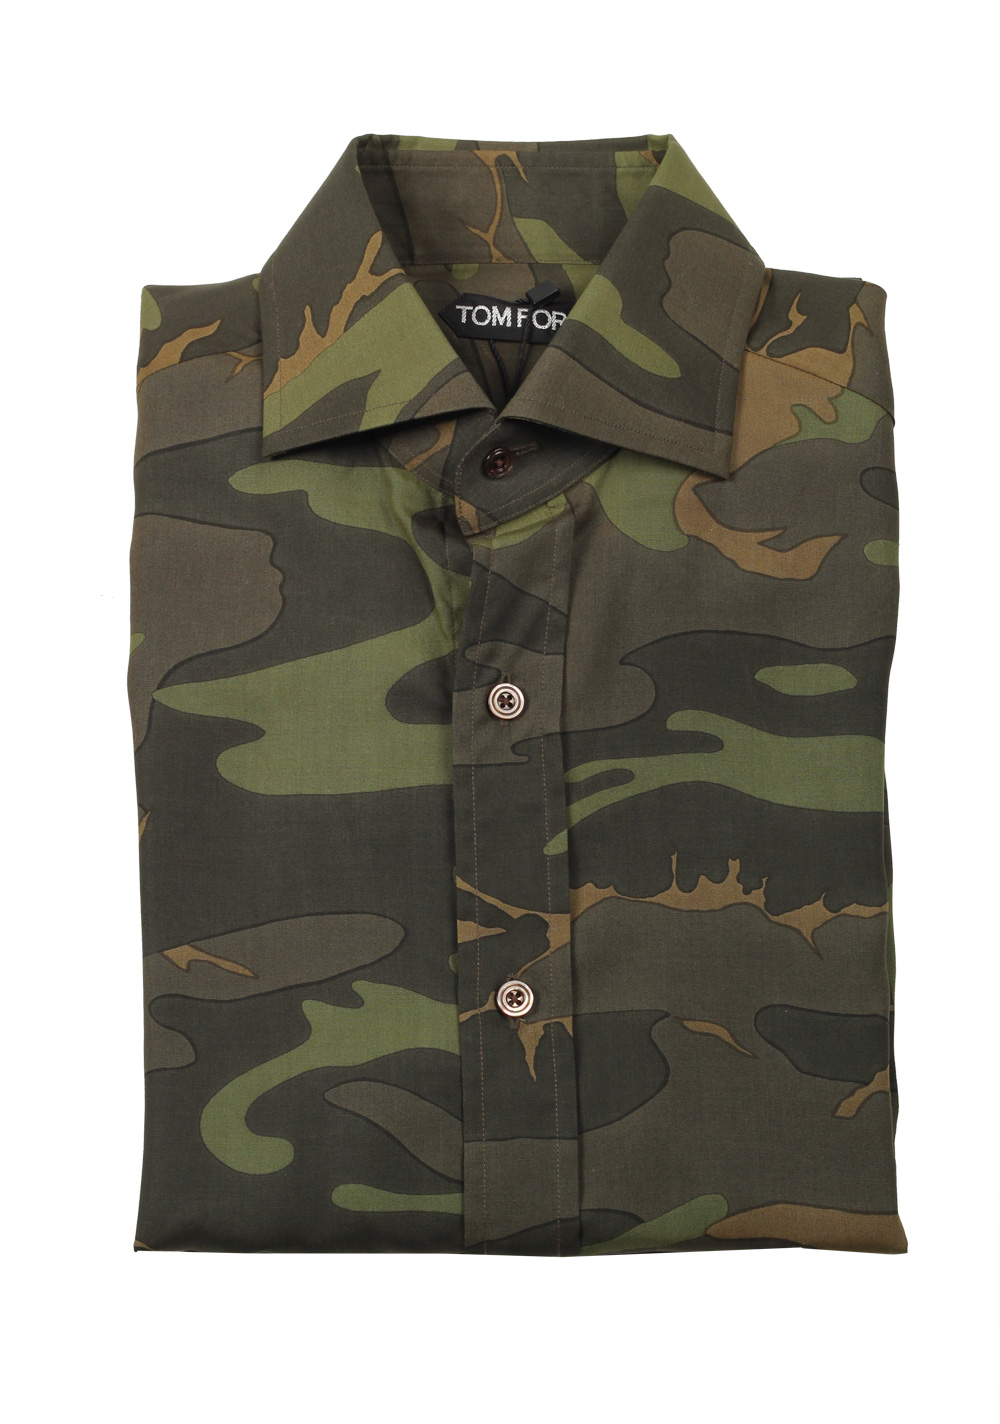 TOM FORD Signature Camouflage Green Dress Shirt | Costume Limité